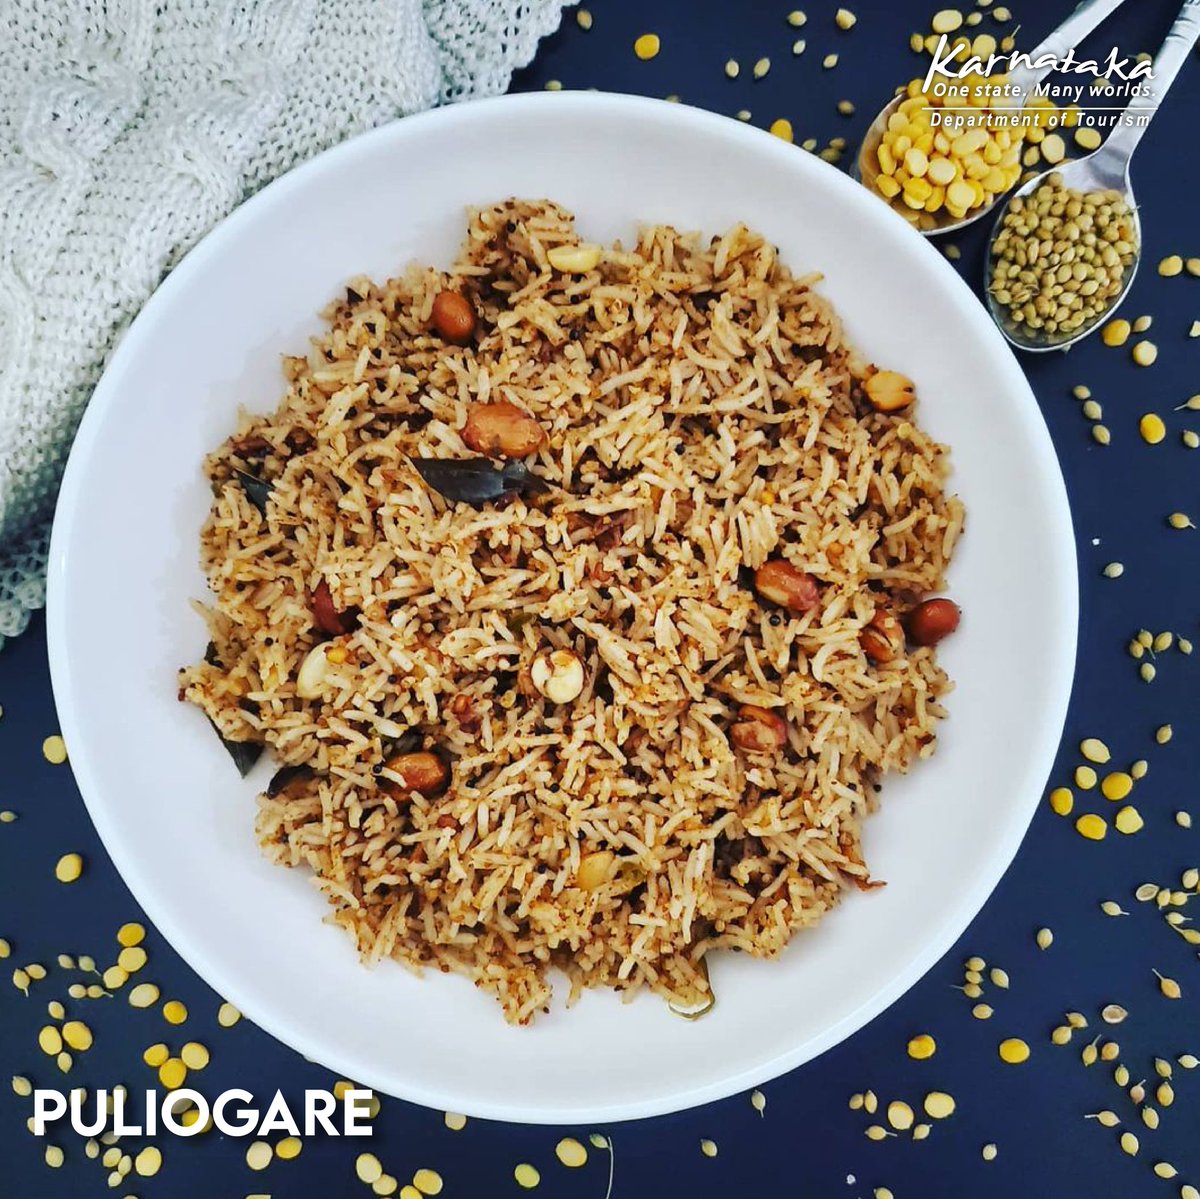 Traditionally prepared with tamarind and jaggery, this popular rice dish is often made in households and served as prasada in temples. 🛕
_
#nammakarnataka #Tourism #food #foodie #foodtweet #thursdayvibes #karnatakacuisine